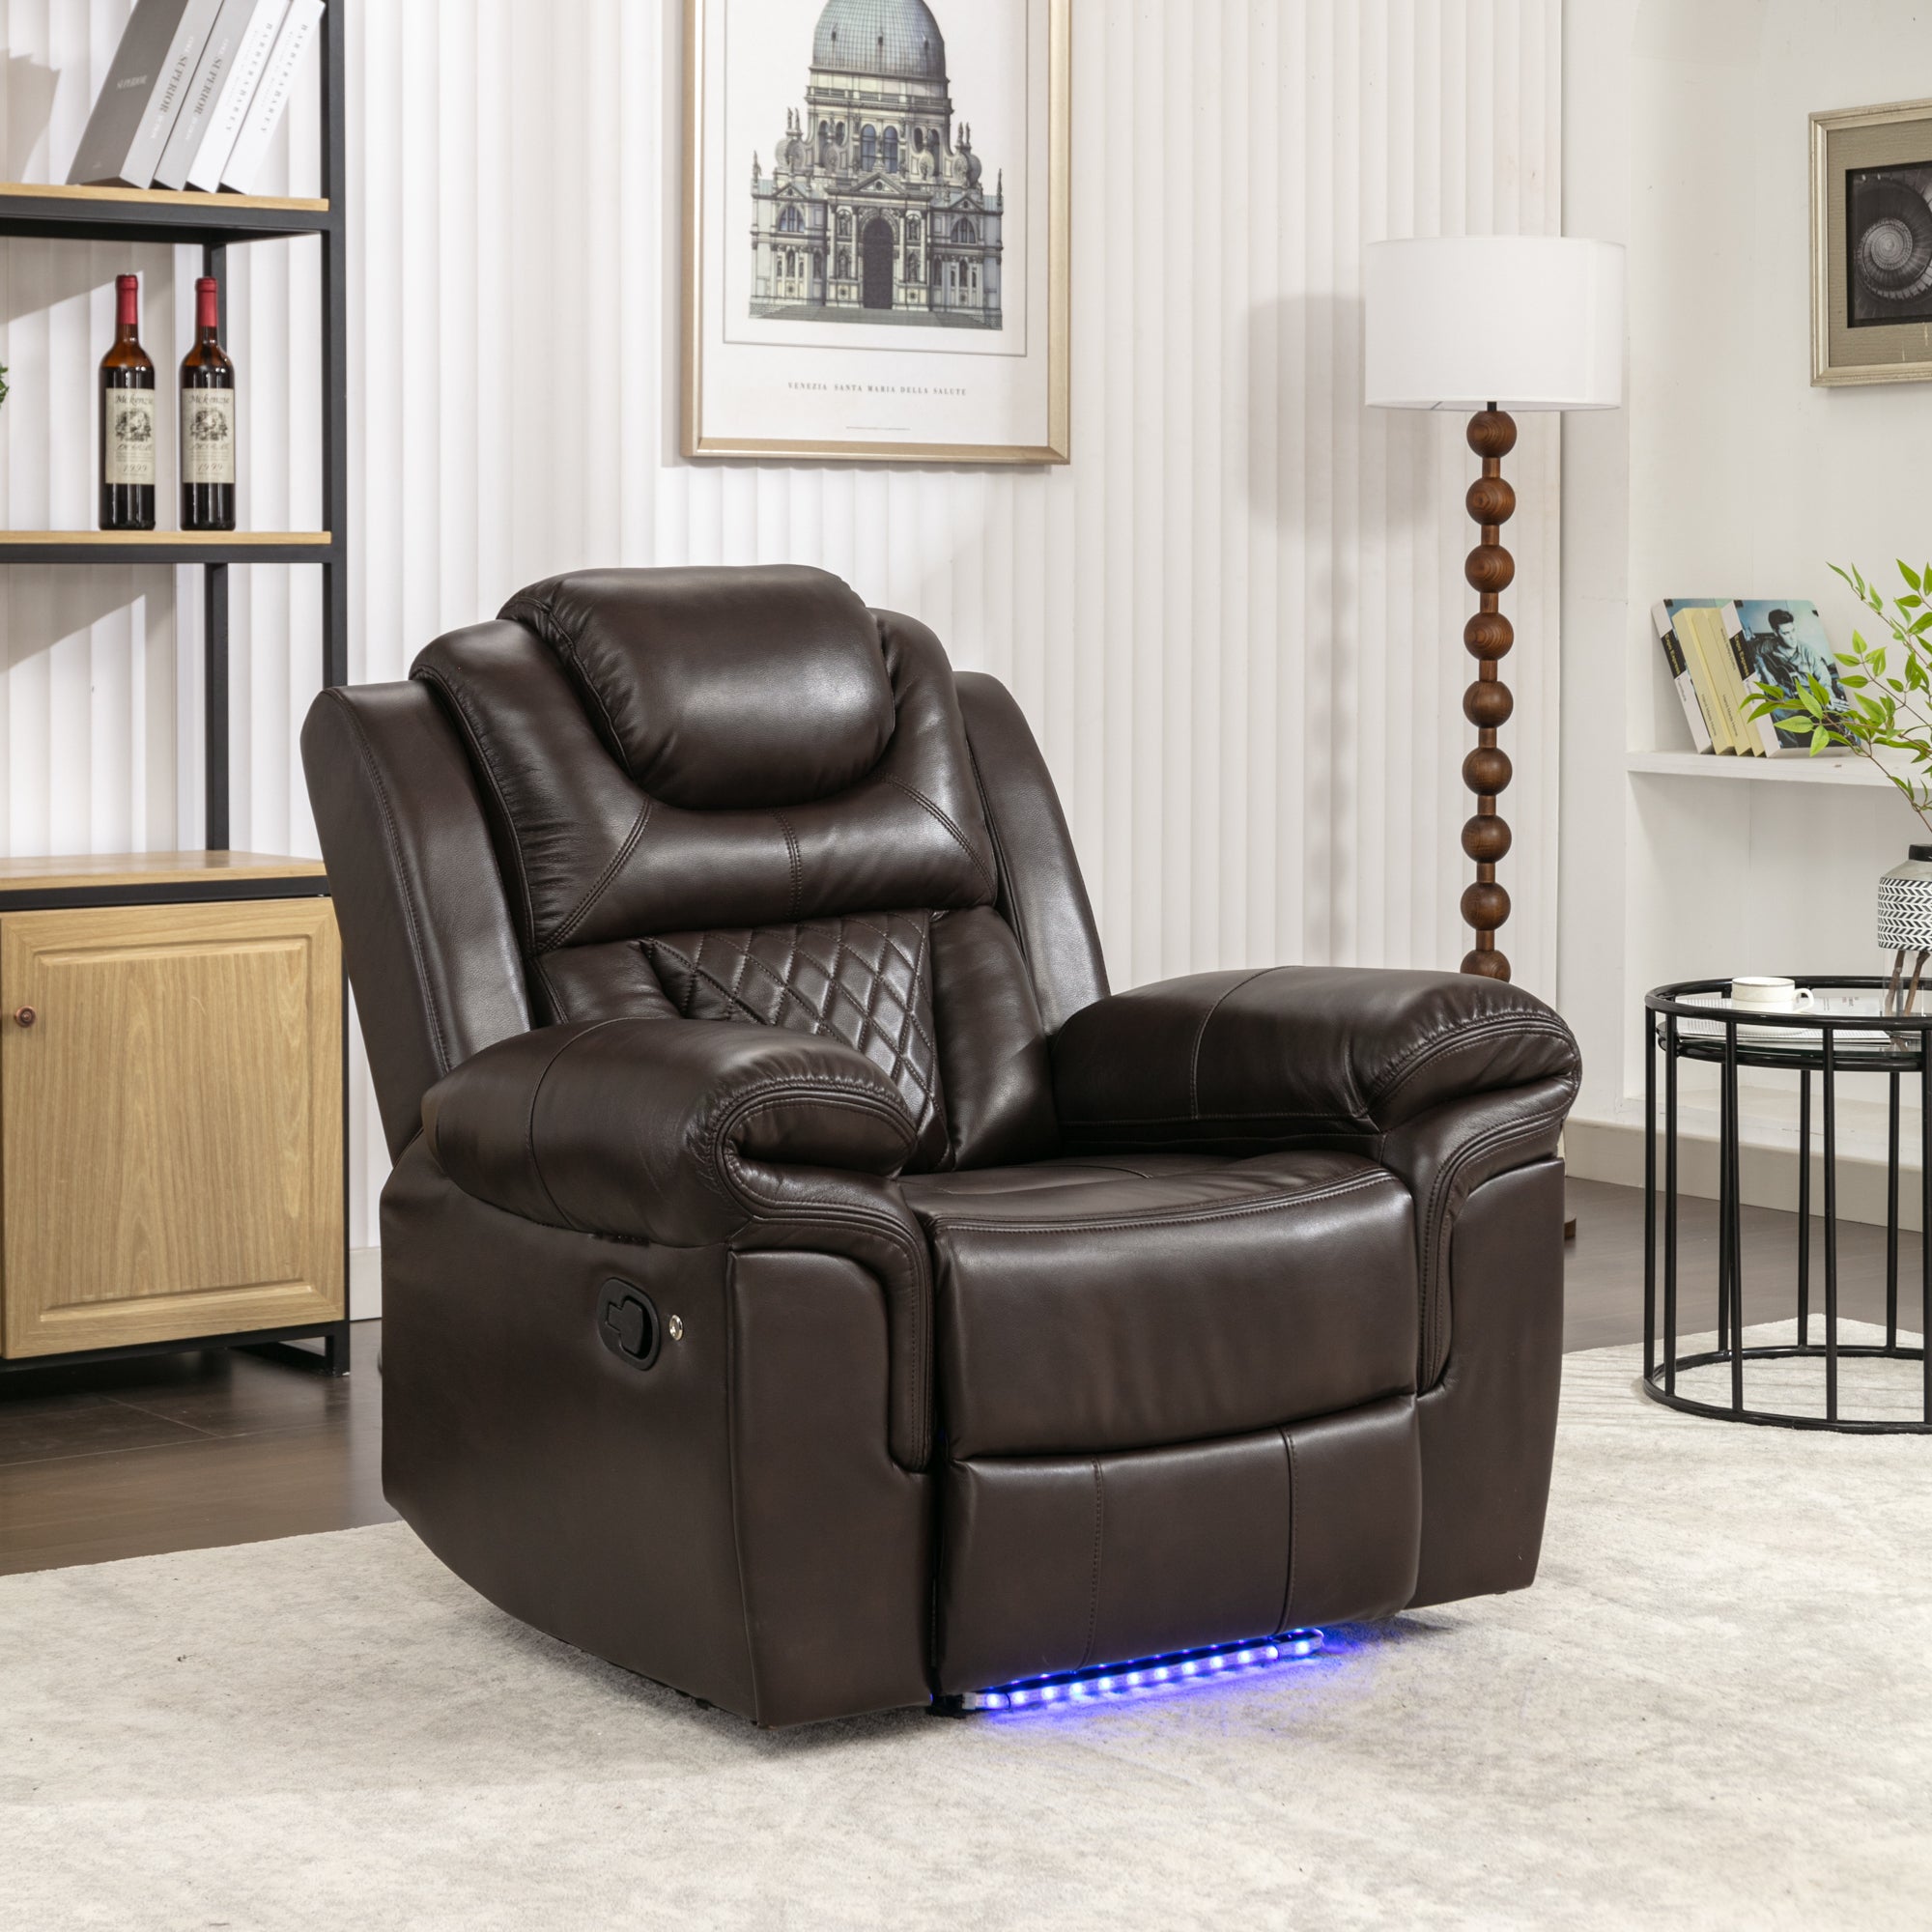 🆓🚛 Home Theater Seating Manual Recliner Chair With Led Light Strip for Living Room, Bedroom, Brown